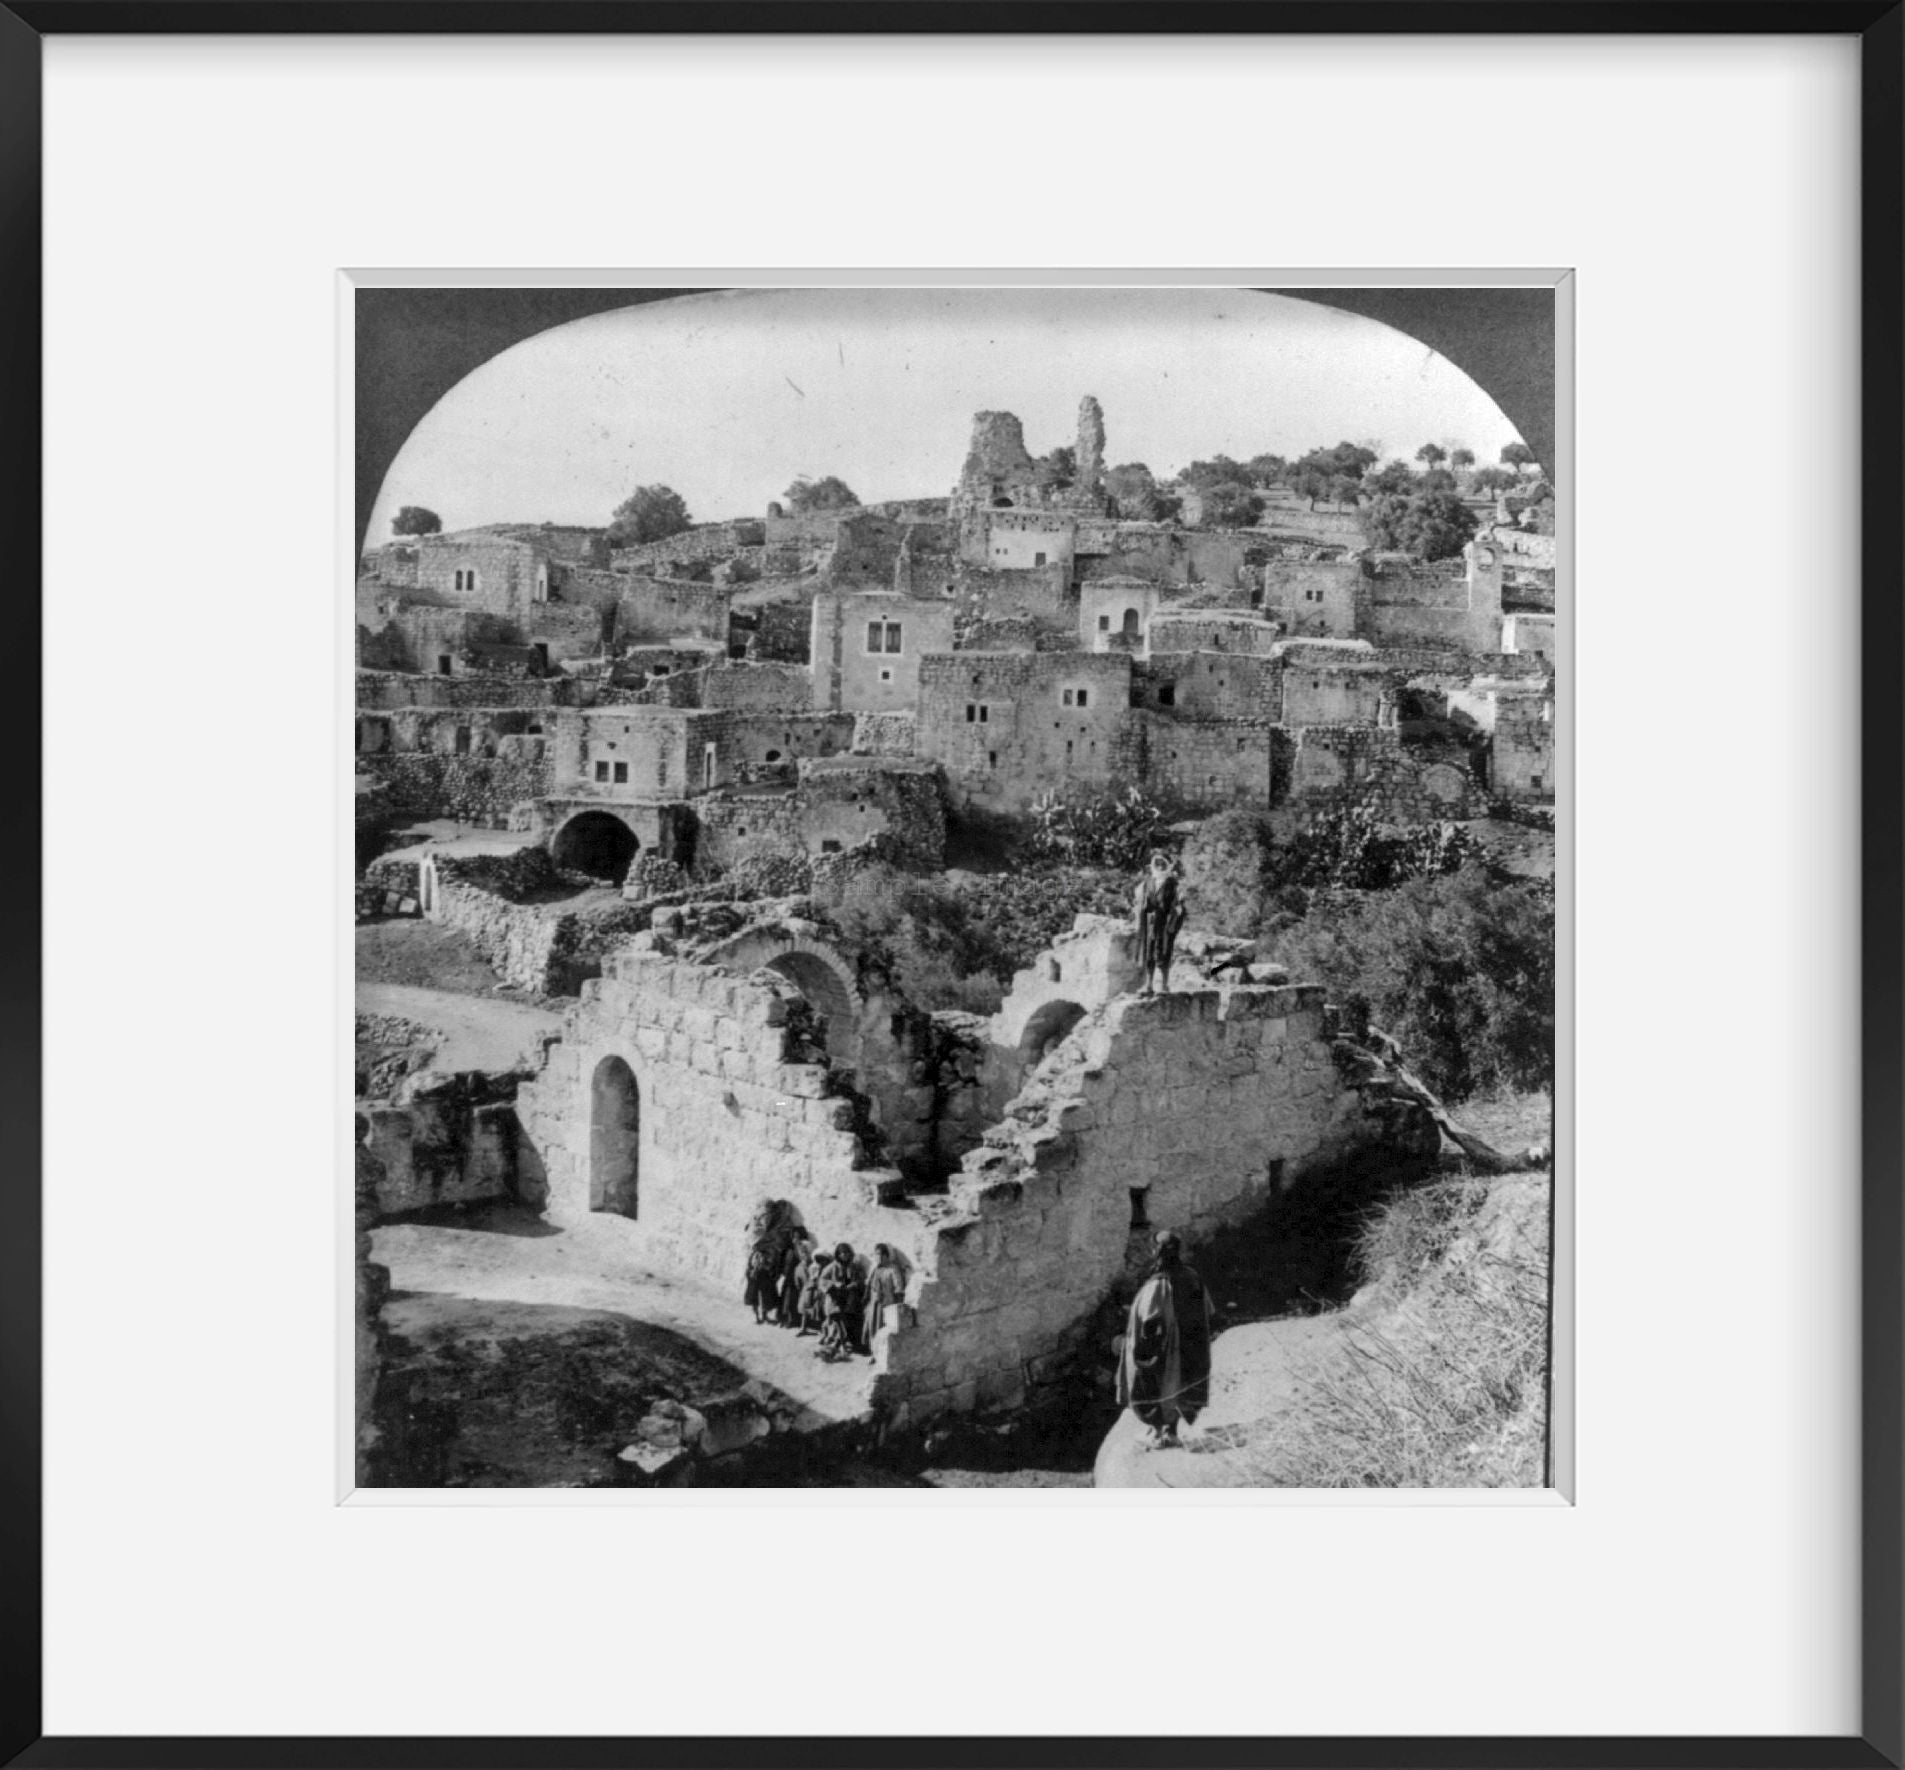 c1926 photograph of A close view of the homes of Bethany, Palestine